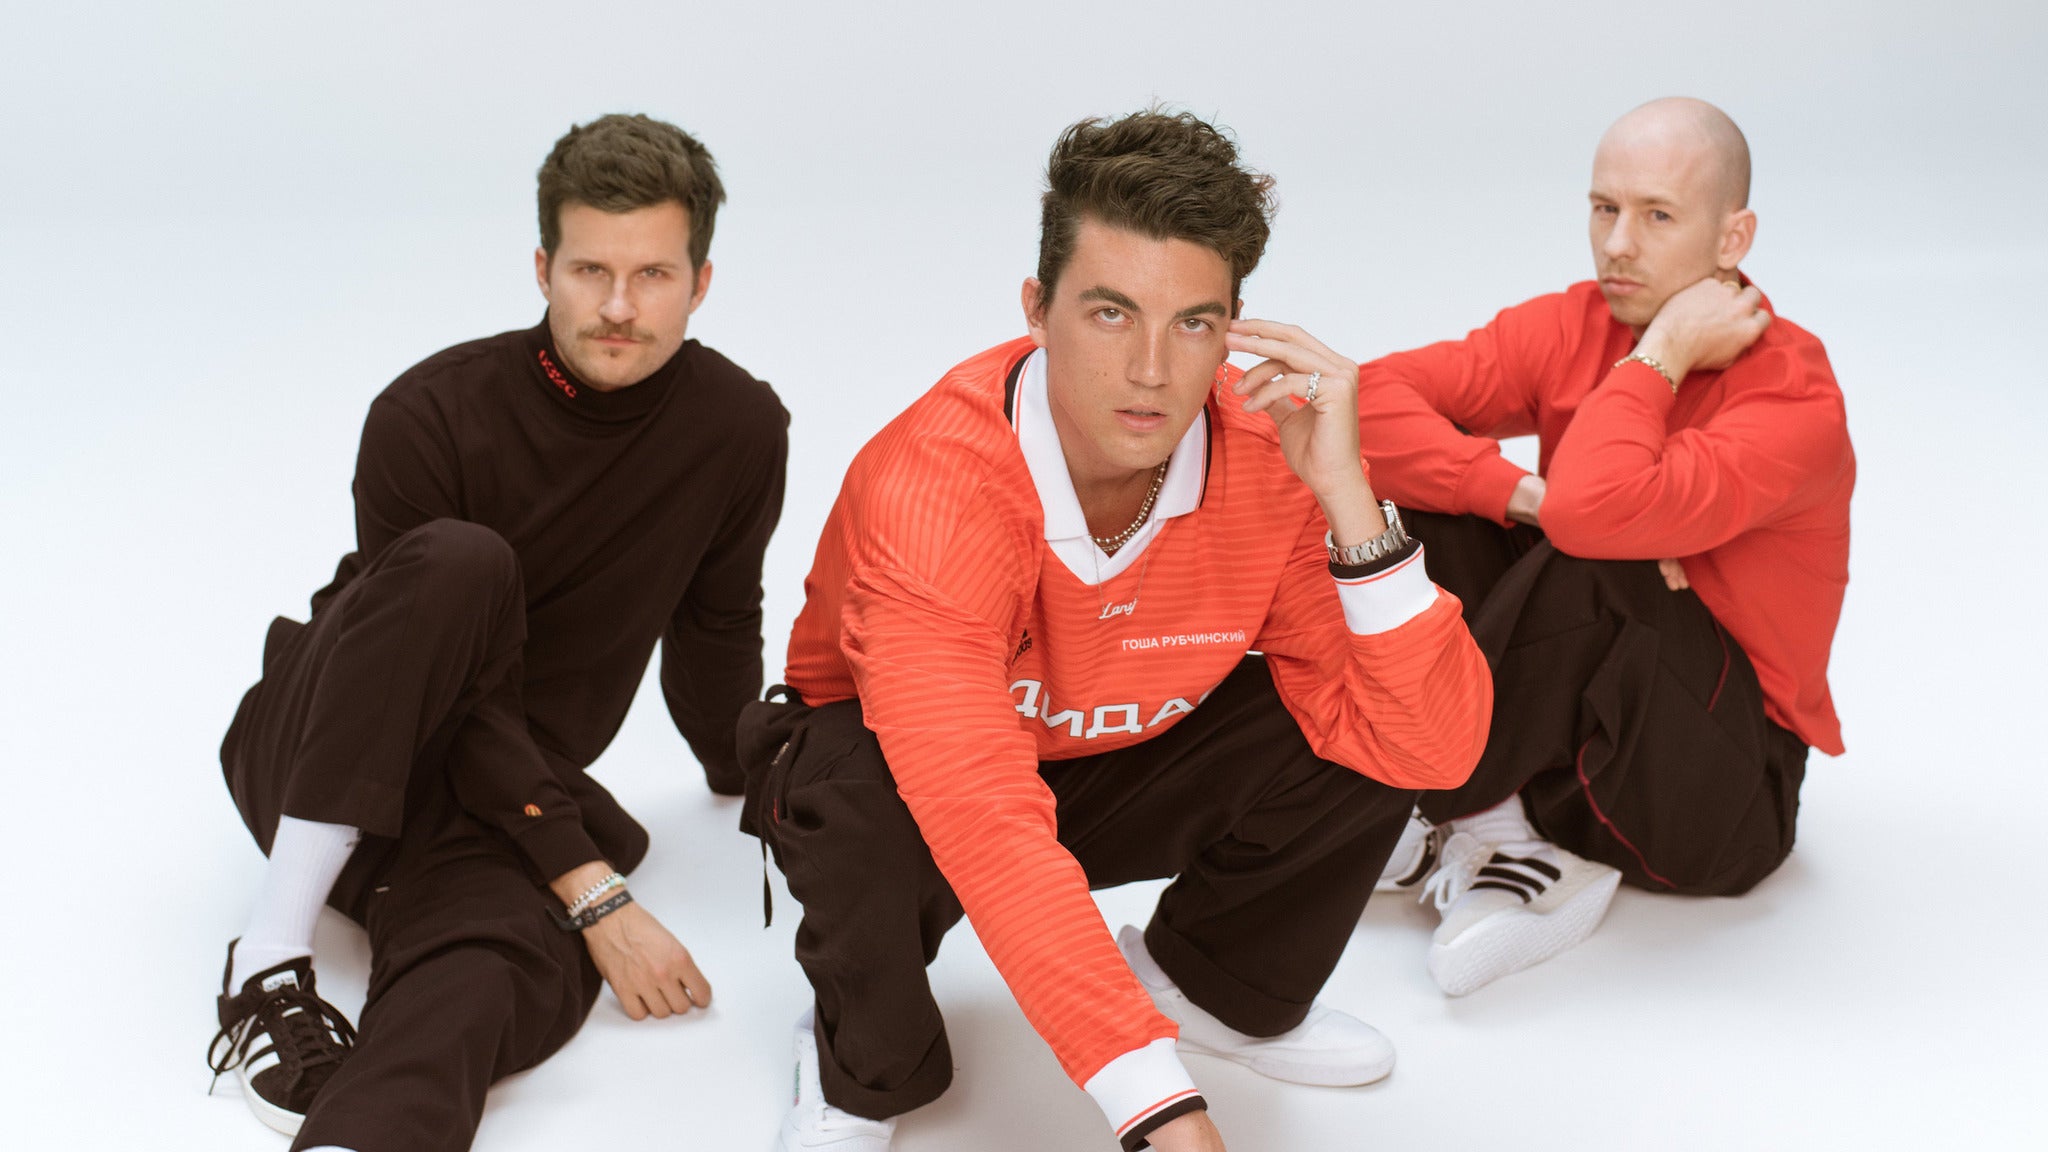 Ones to Watch Presents LANY in Chicago promo photo for Live Nation Mobile App presale offer code